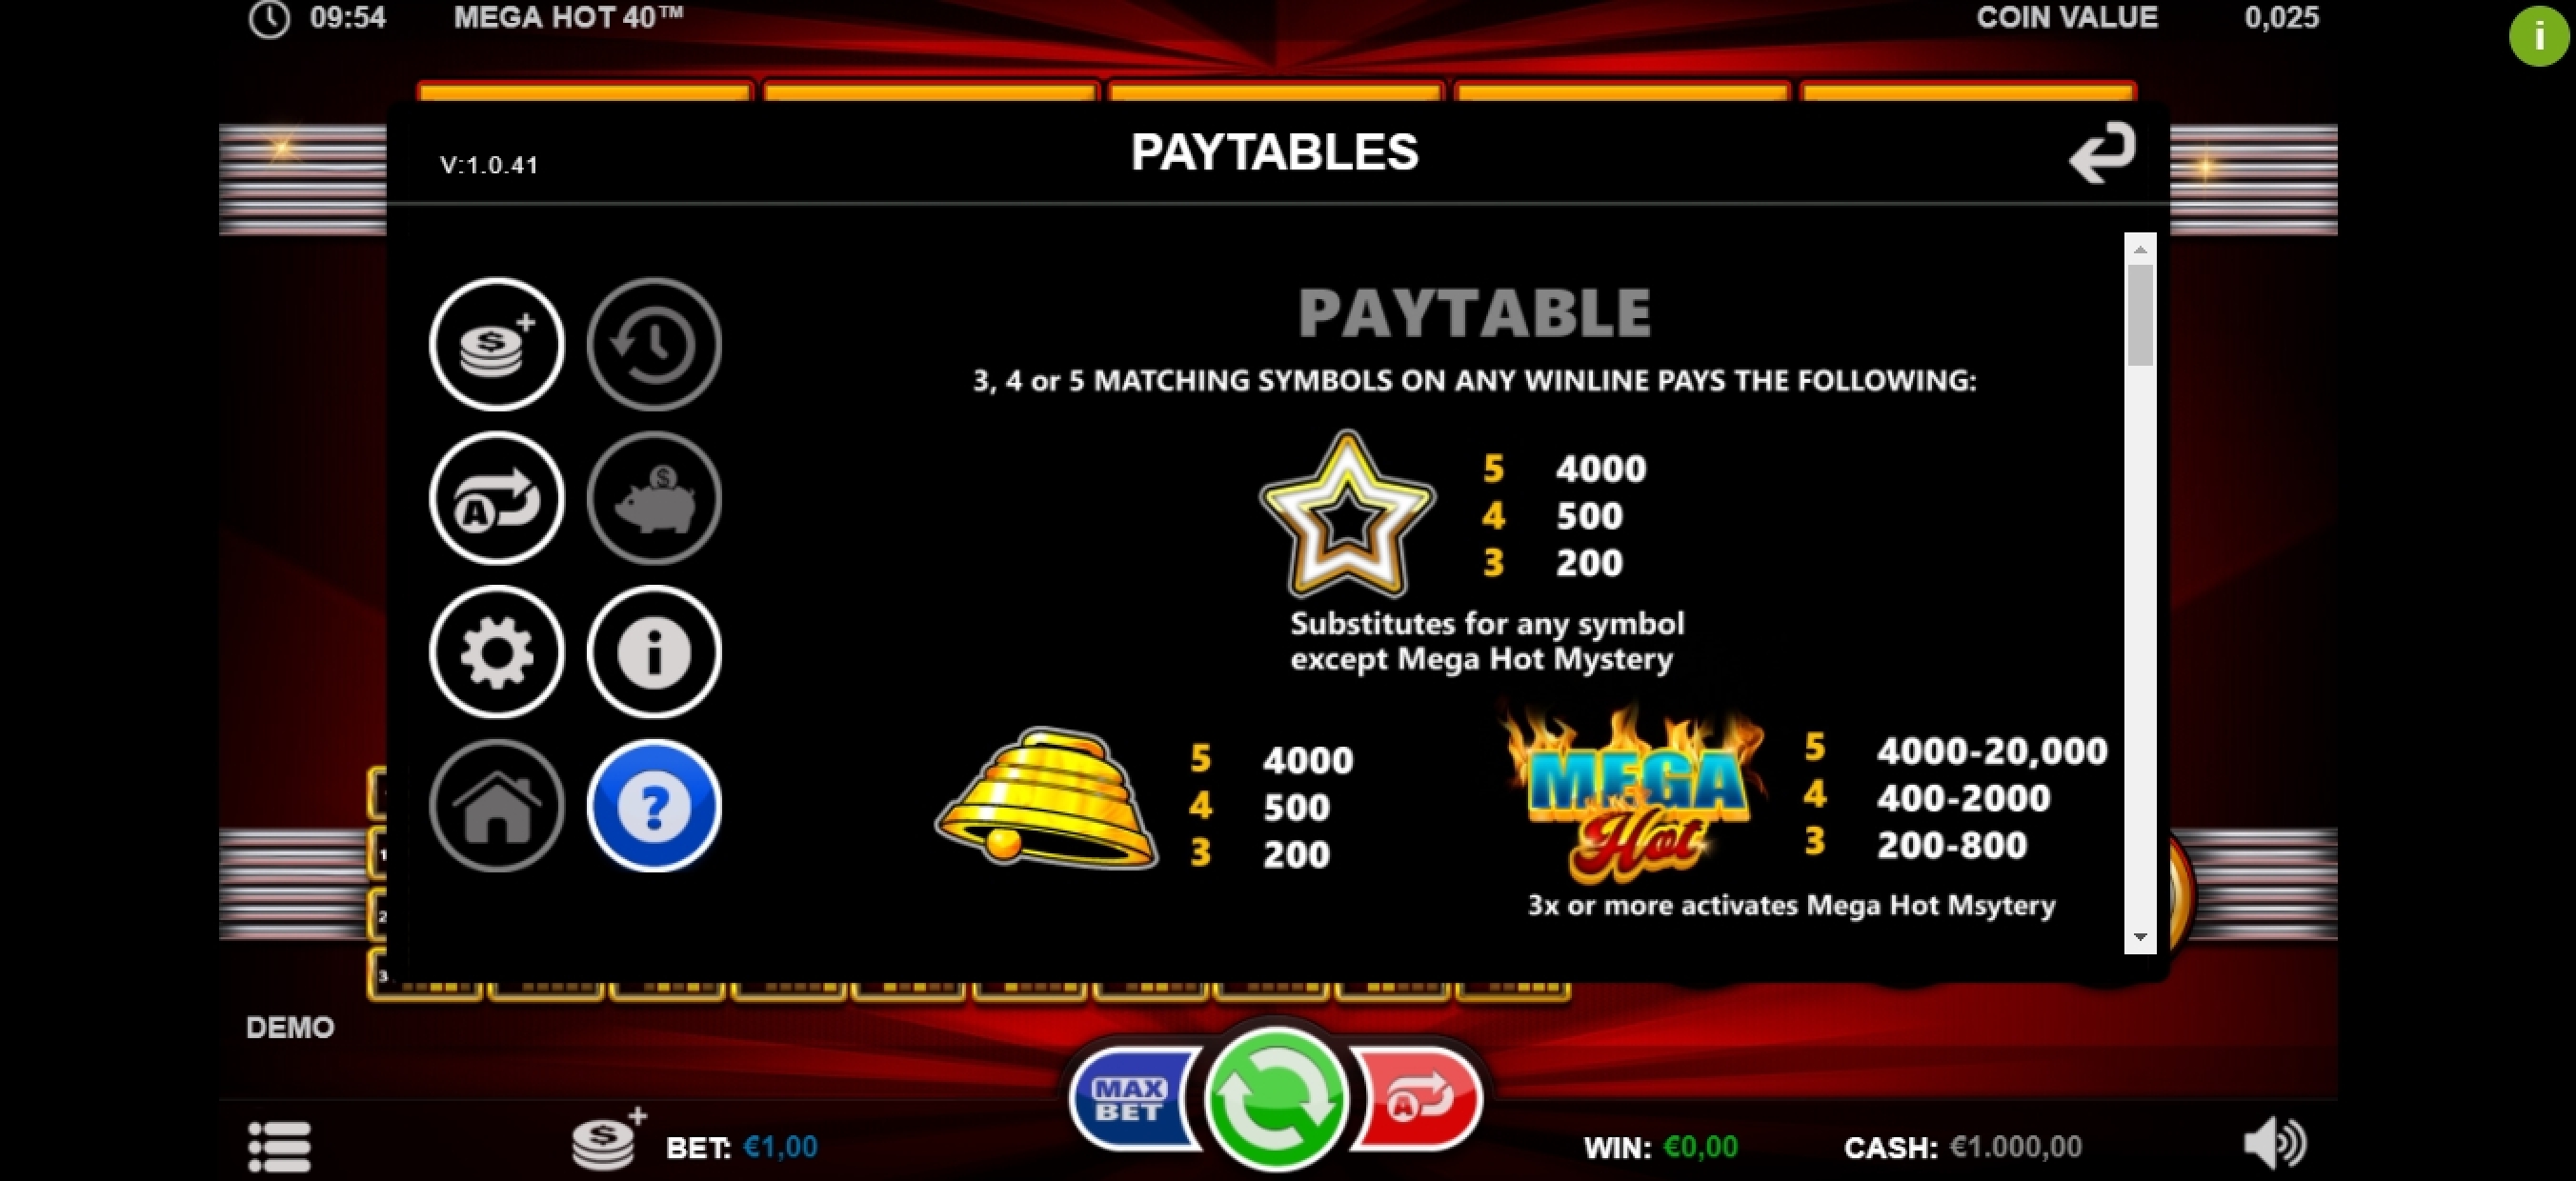 Info of Mega Hot 40 Slot Game by Betsson Group